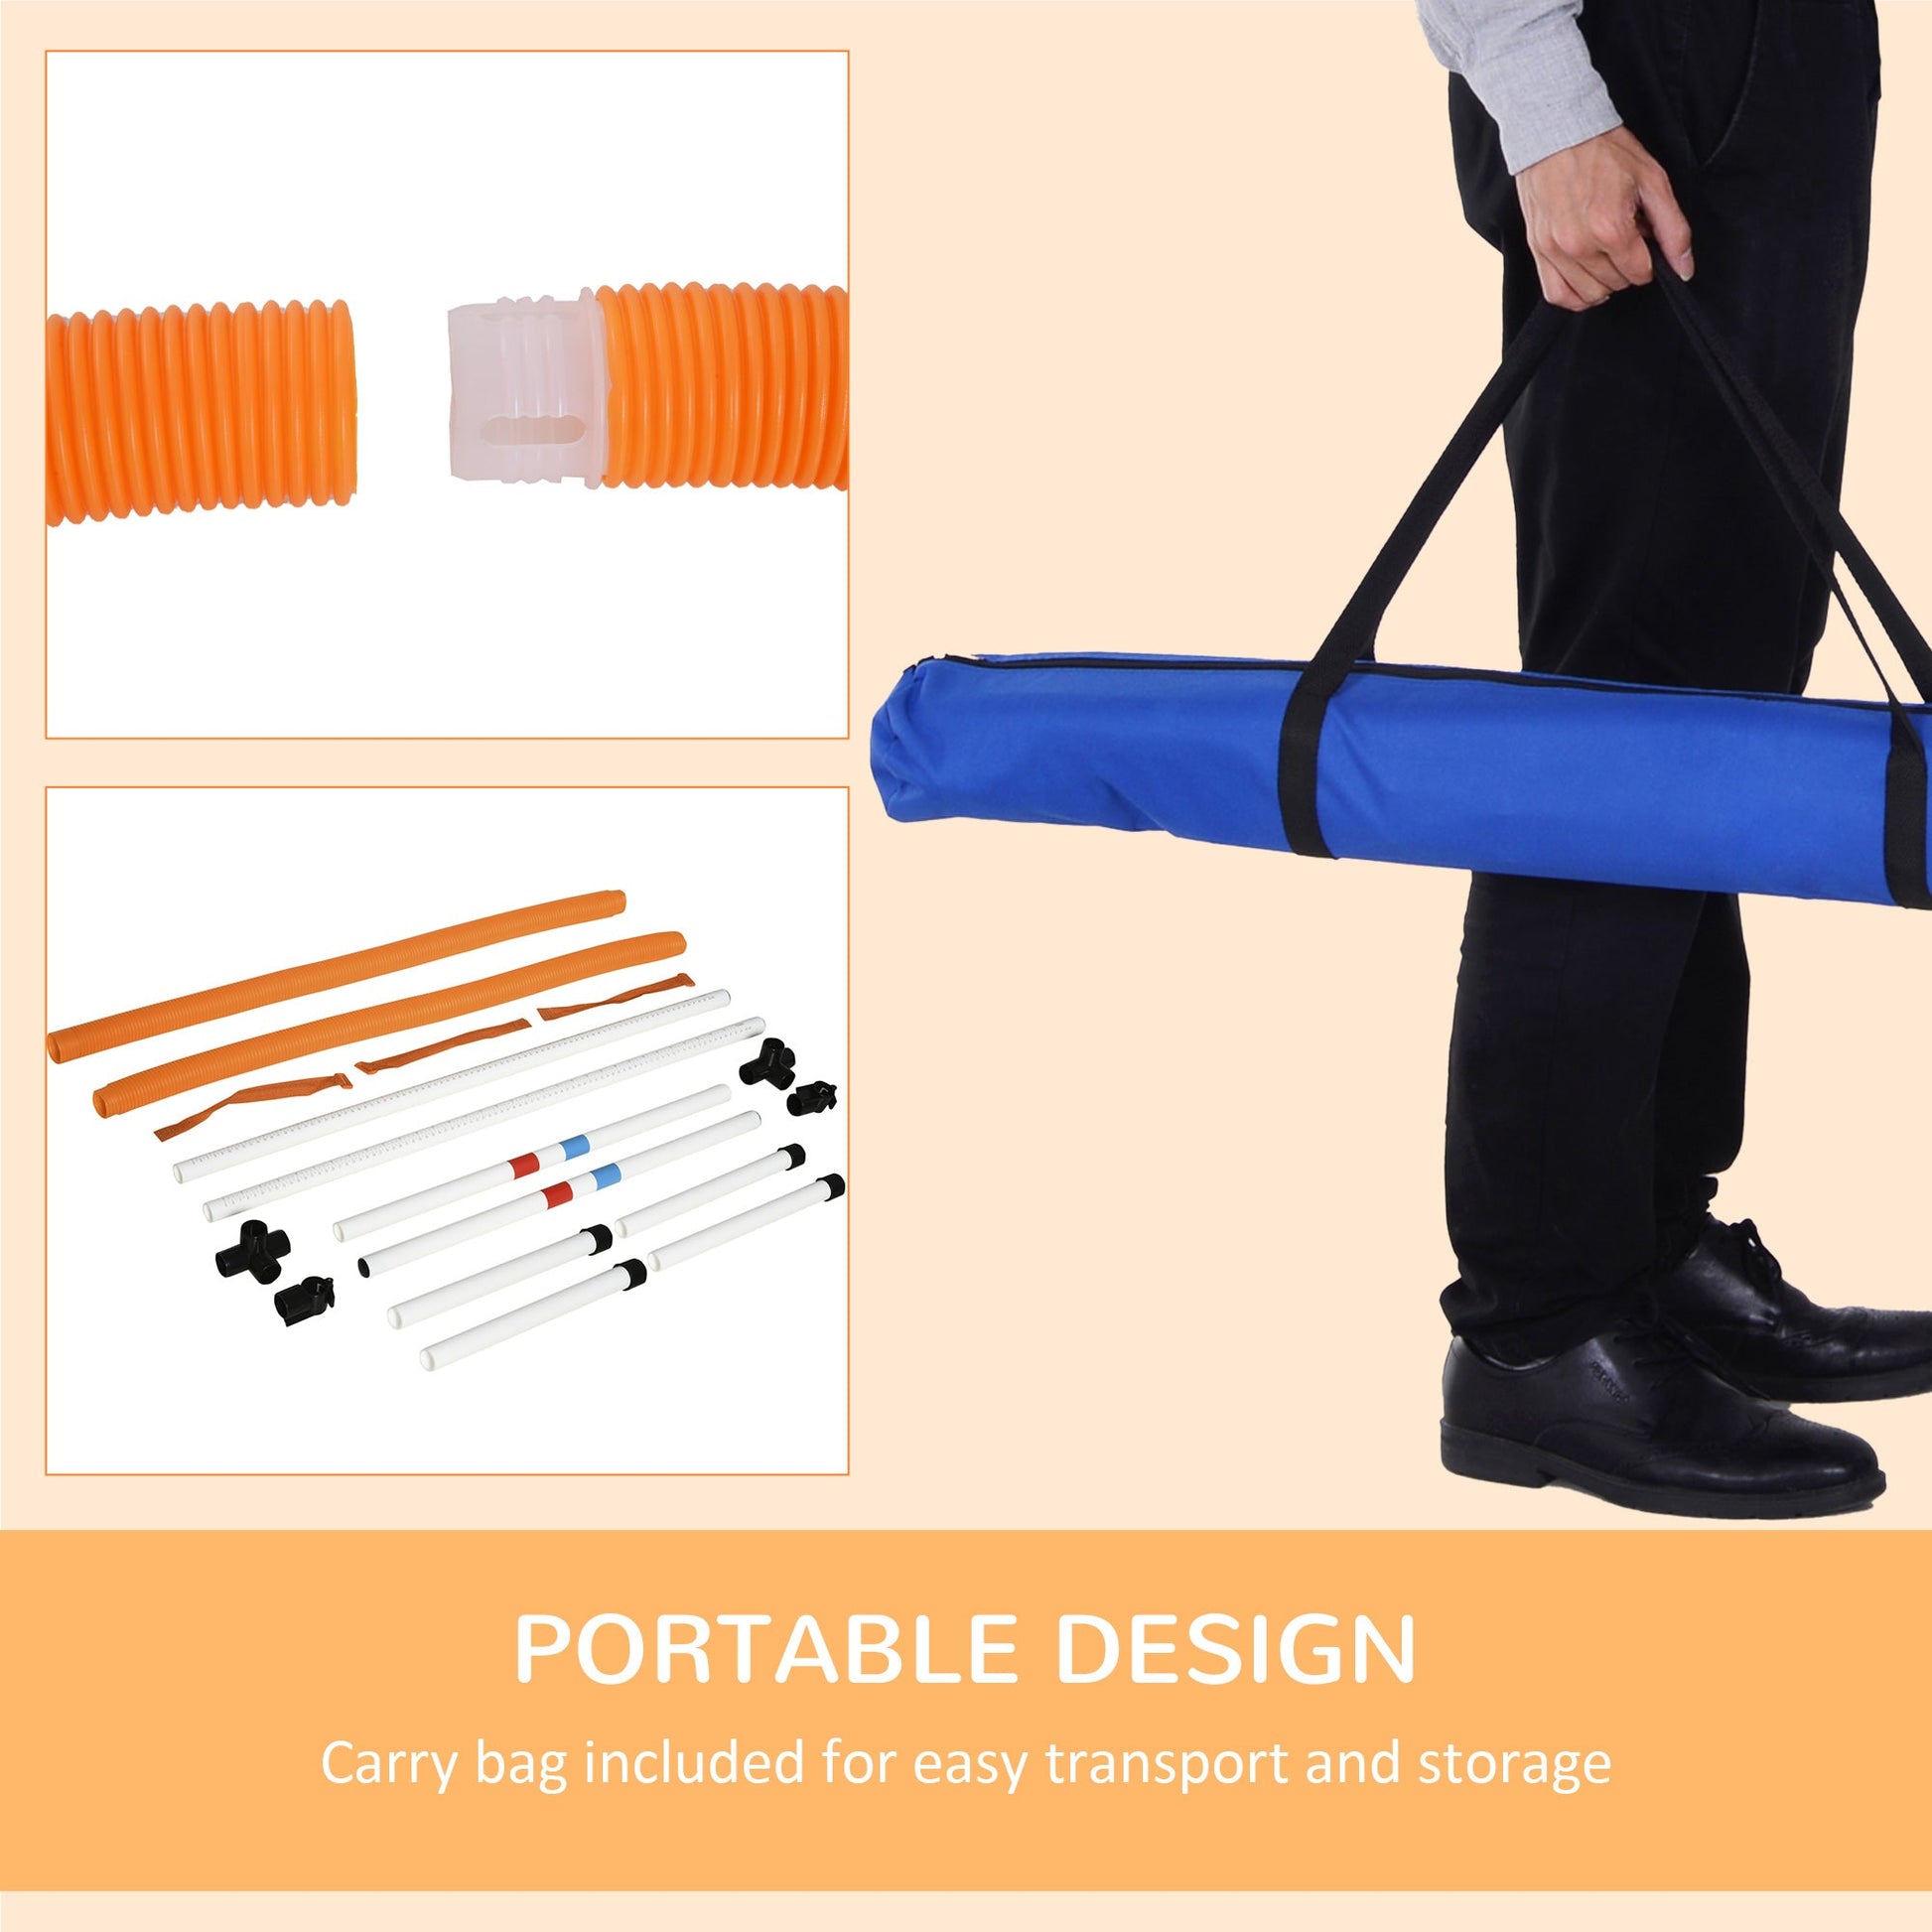 2-in-1 Dog Obstacle Training Agility Equipment Tire Jump Ring/Hurdle Bar with a Simple &; Easy Setup &; Storage Bag at Gallery Canada